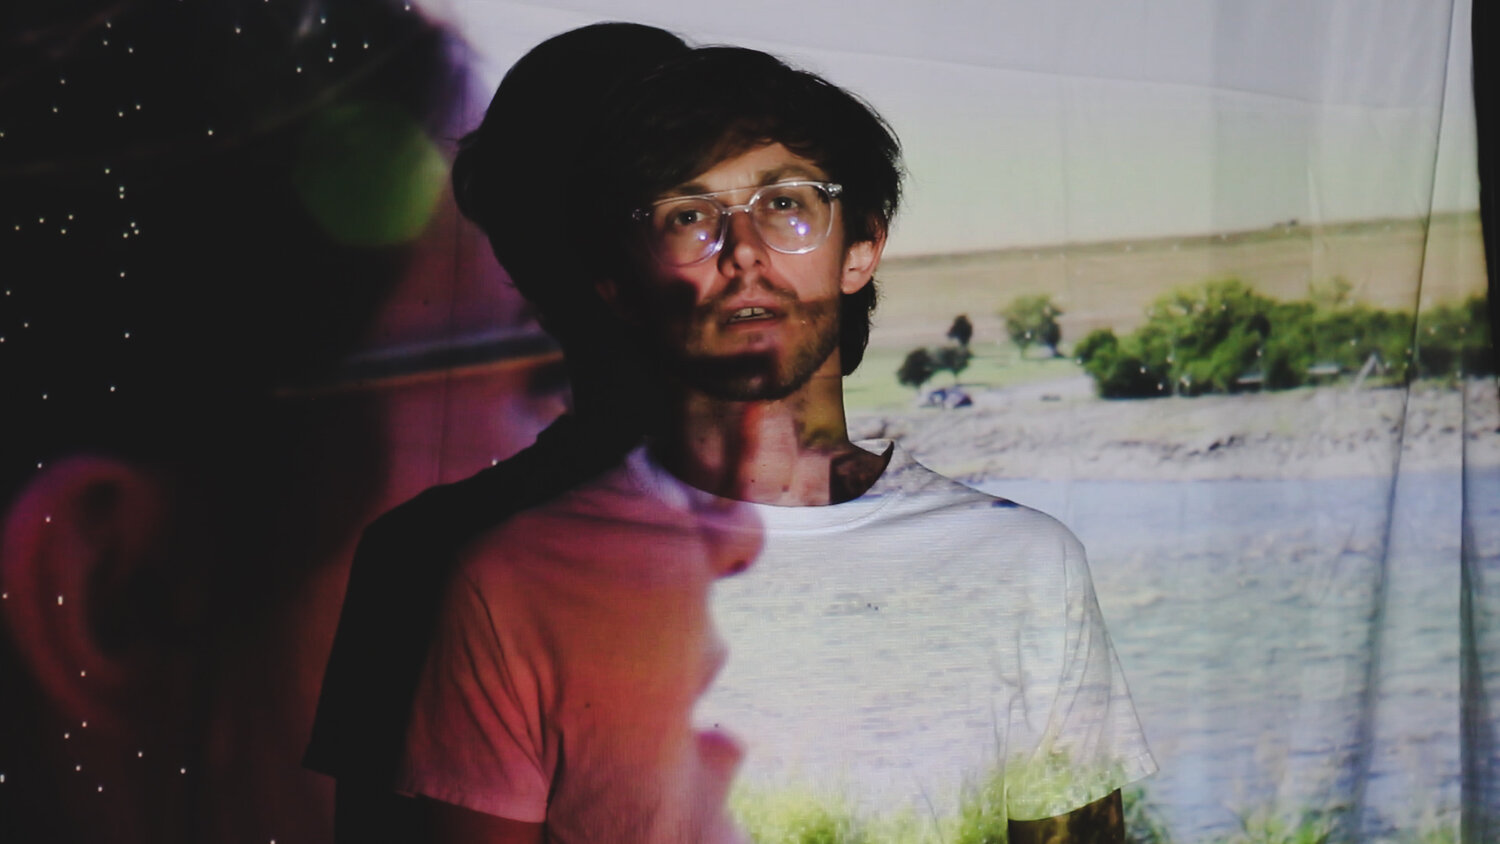 Jordan Sutton of Goosechase wears glasses and stands in front of a sheet with a projected image of a deserted field.